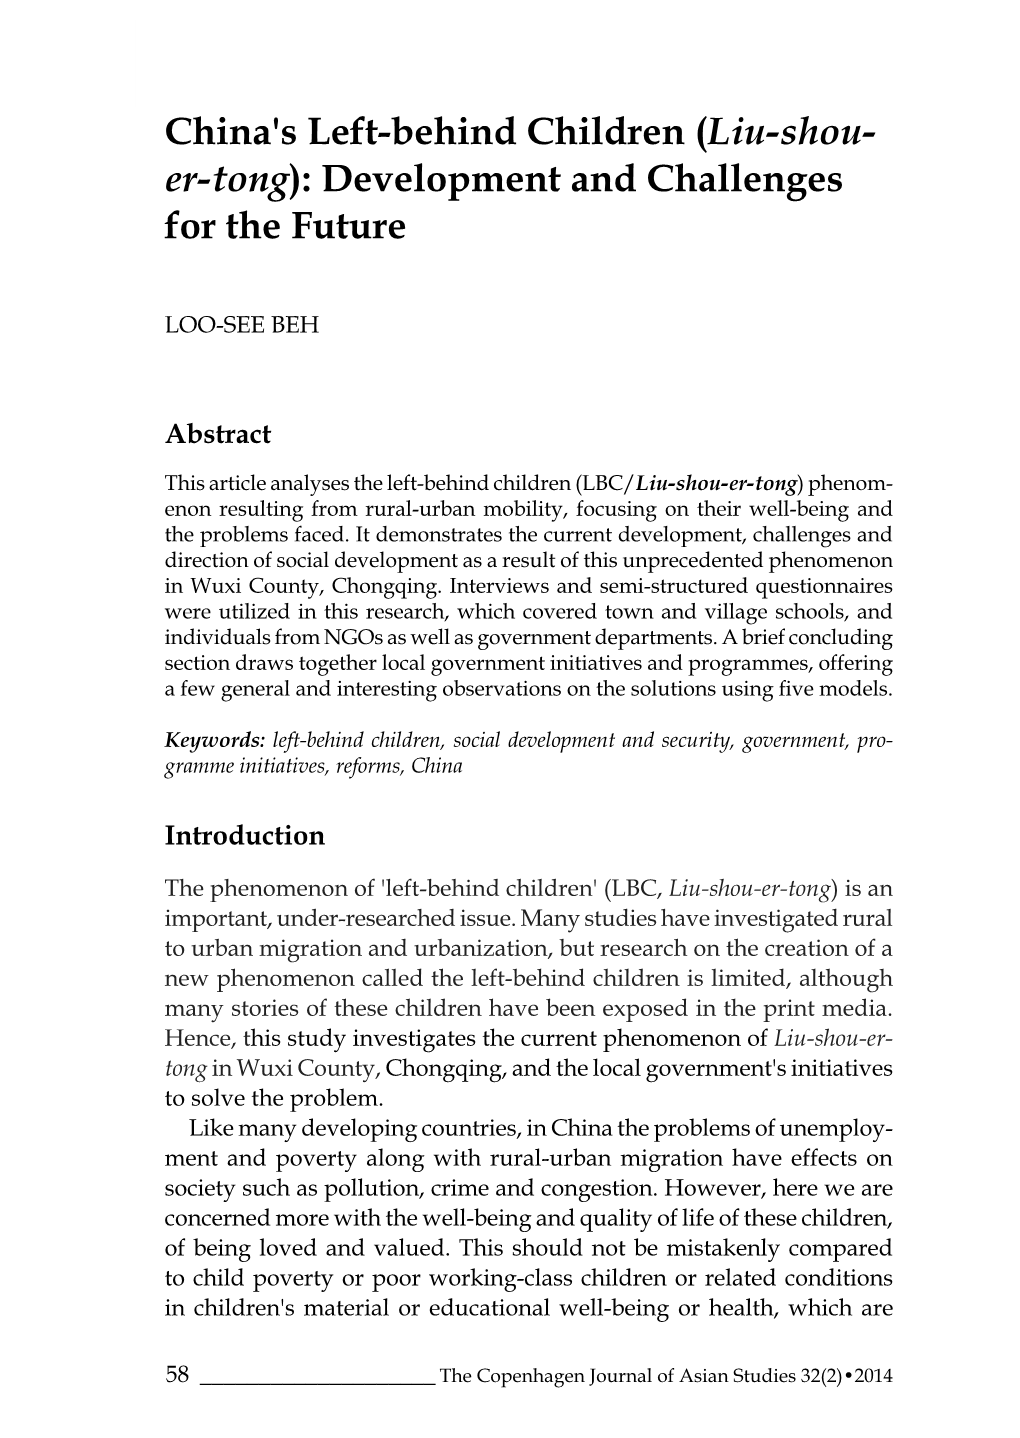 China's Left-Behind Children (Liu-Shou- Er-Tong): Development and Challenges for the Future